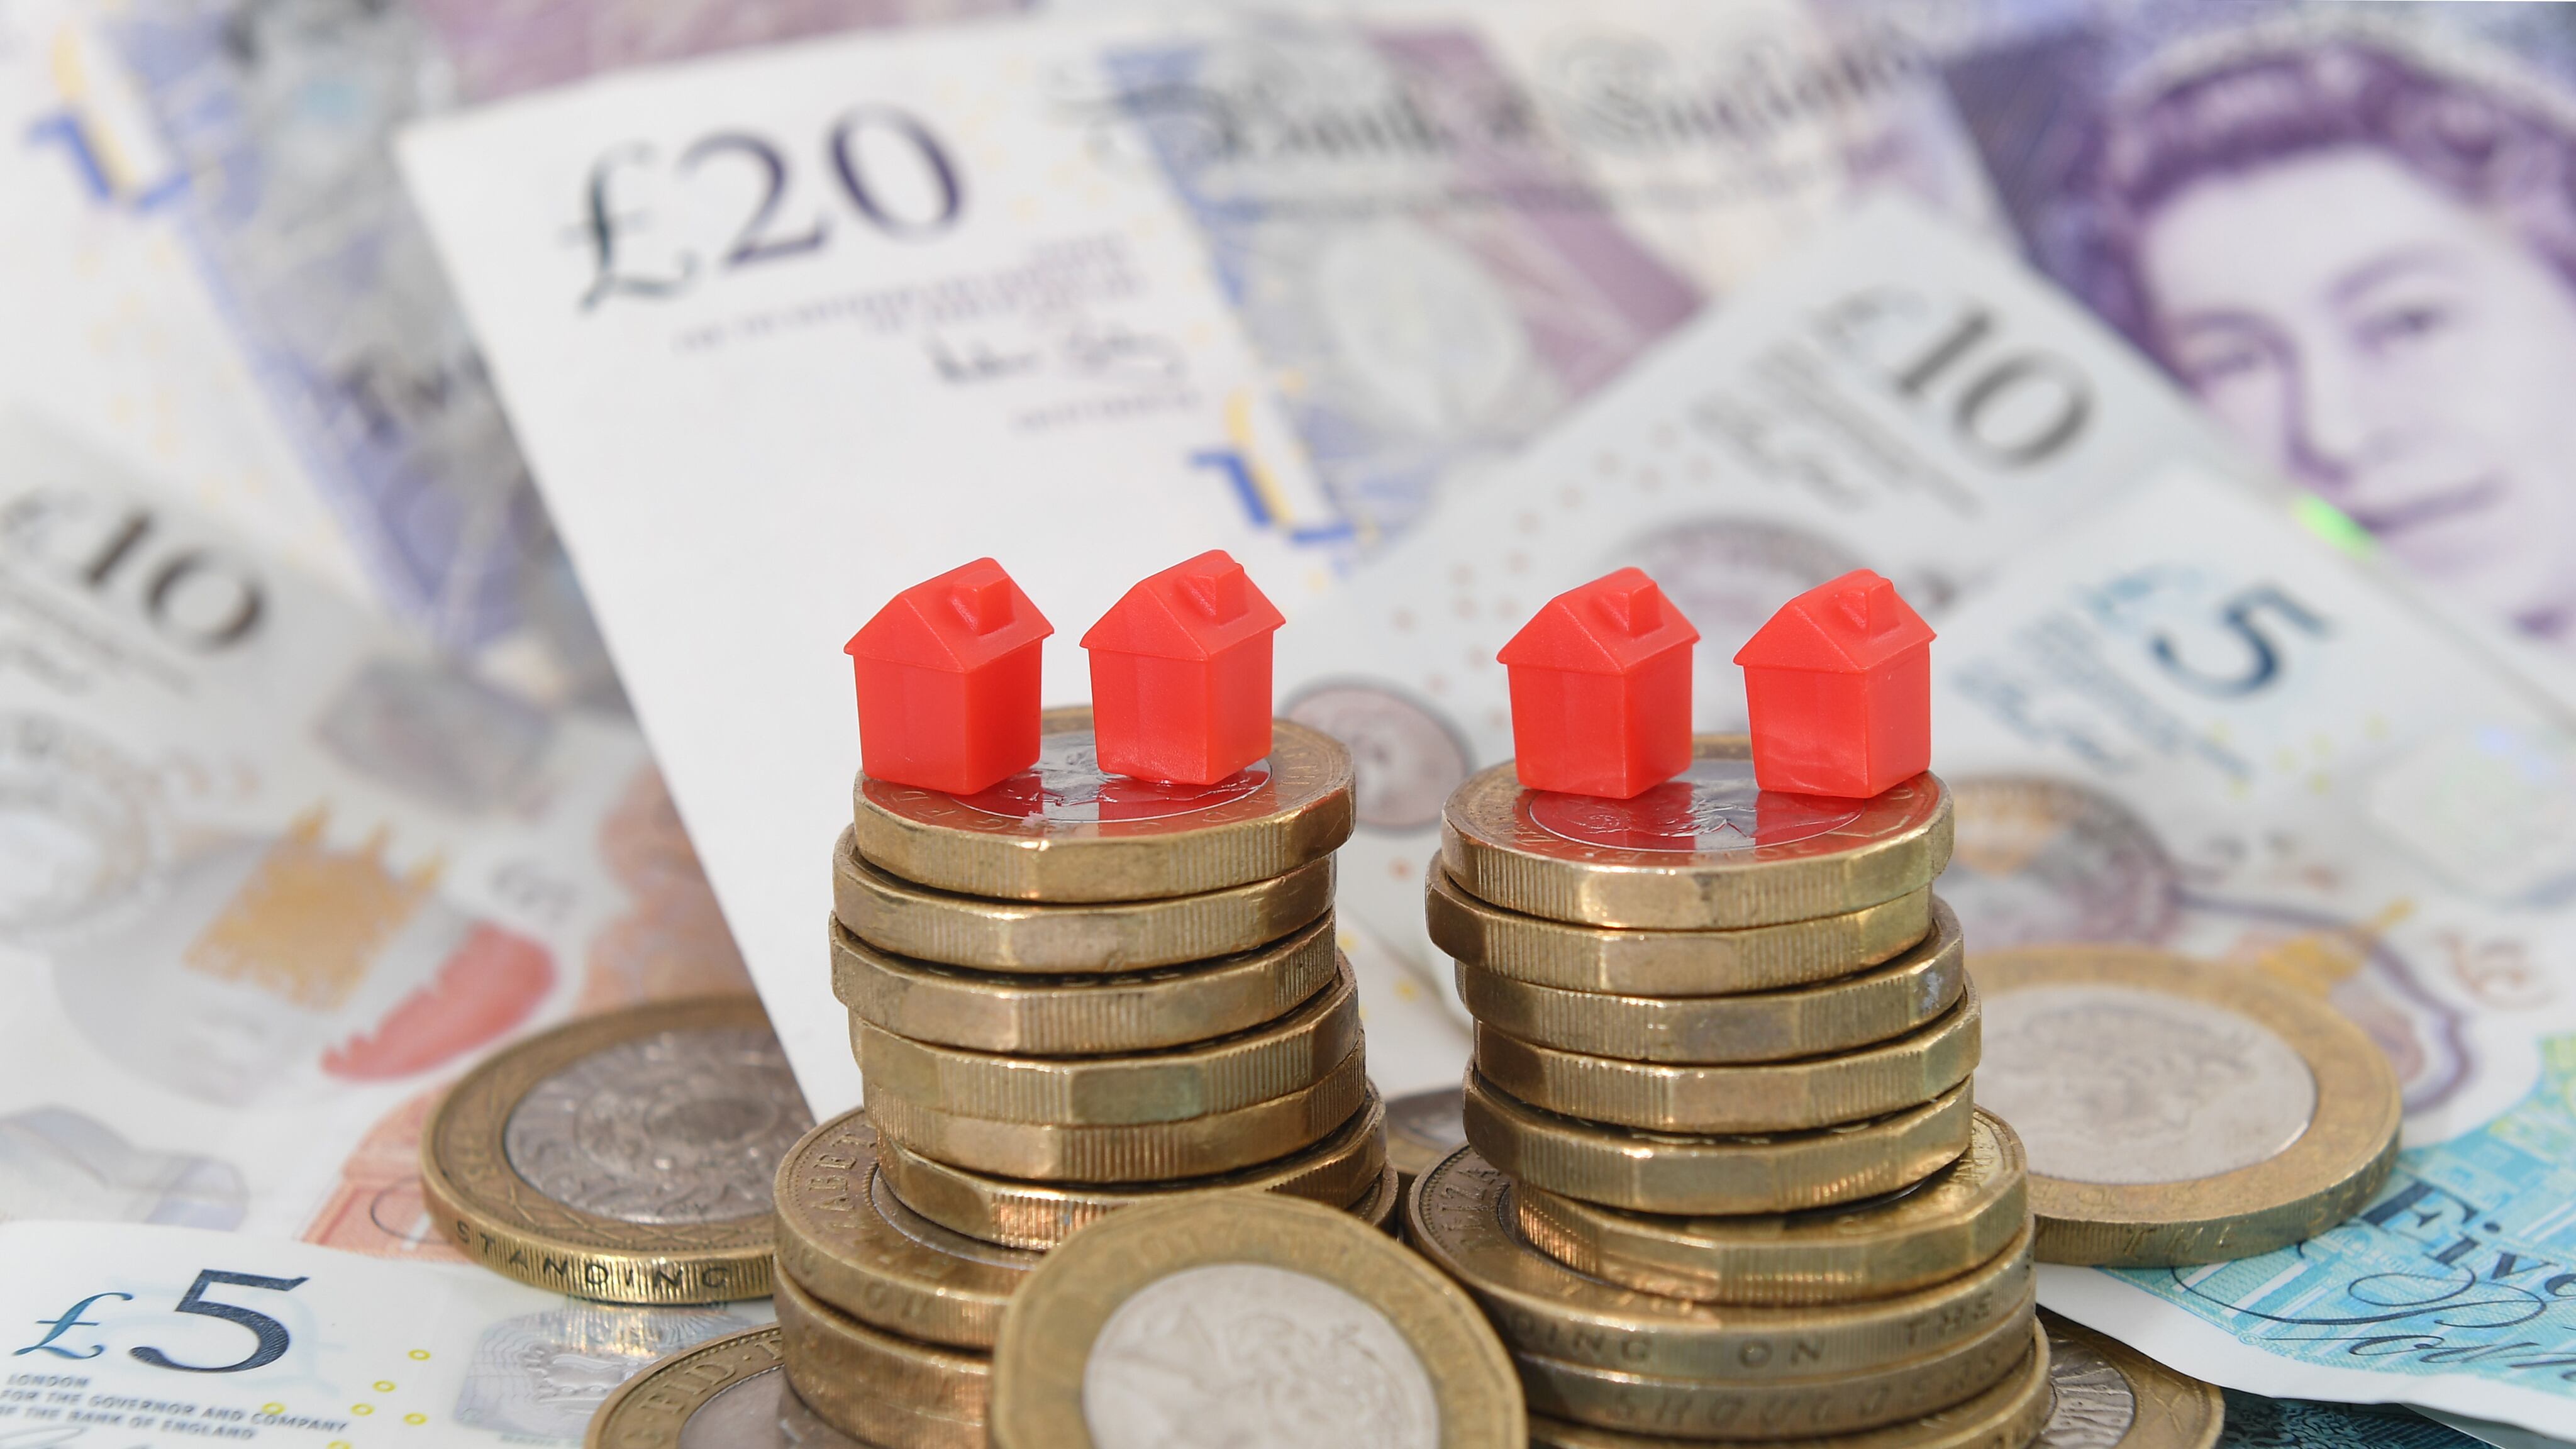 The average first-time buyer needs a household income of more than £60,000 to get onto the property ladder, according to Zoopla